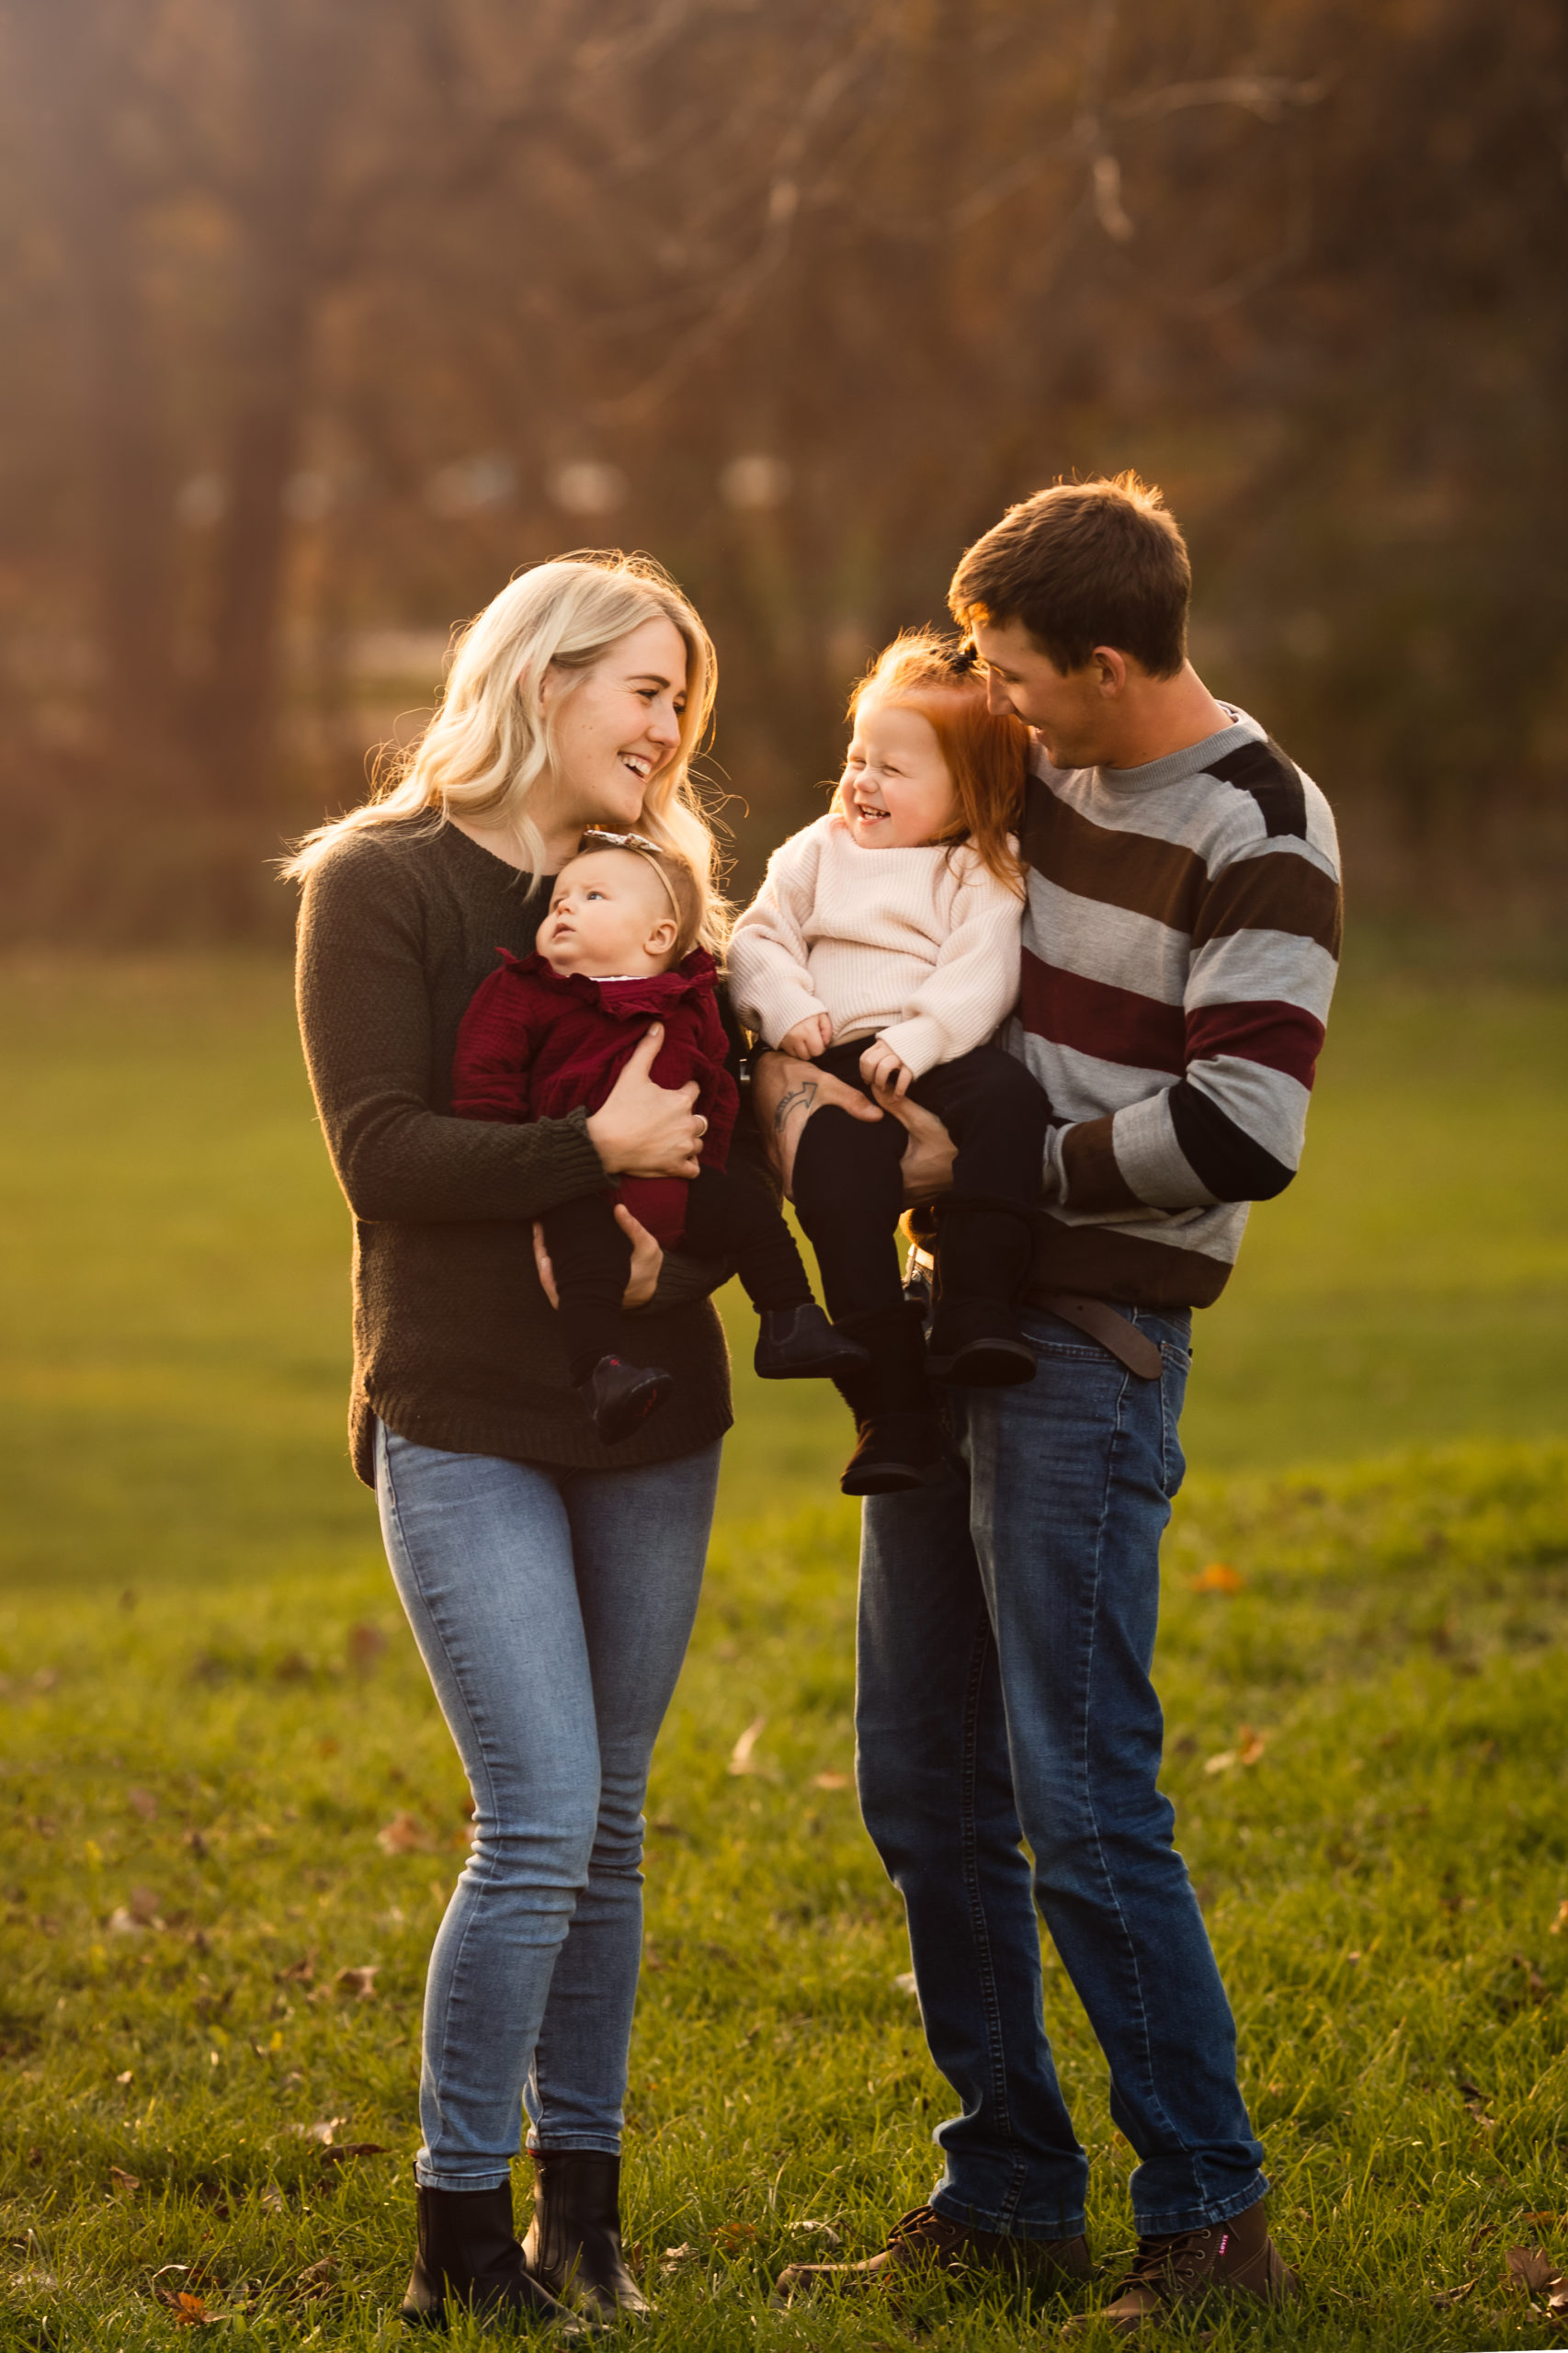 Family outdoors photography in Janesville, WI